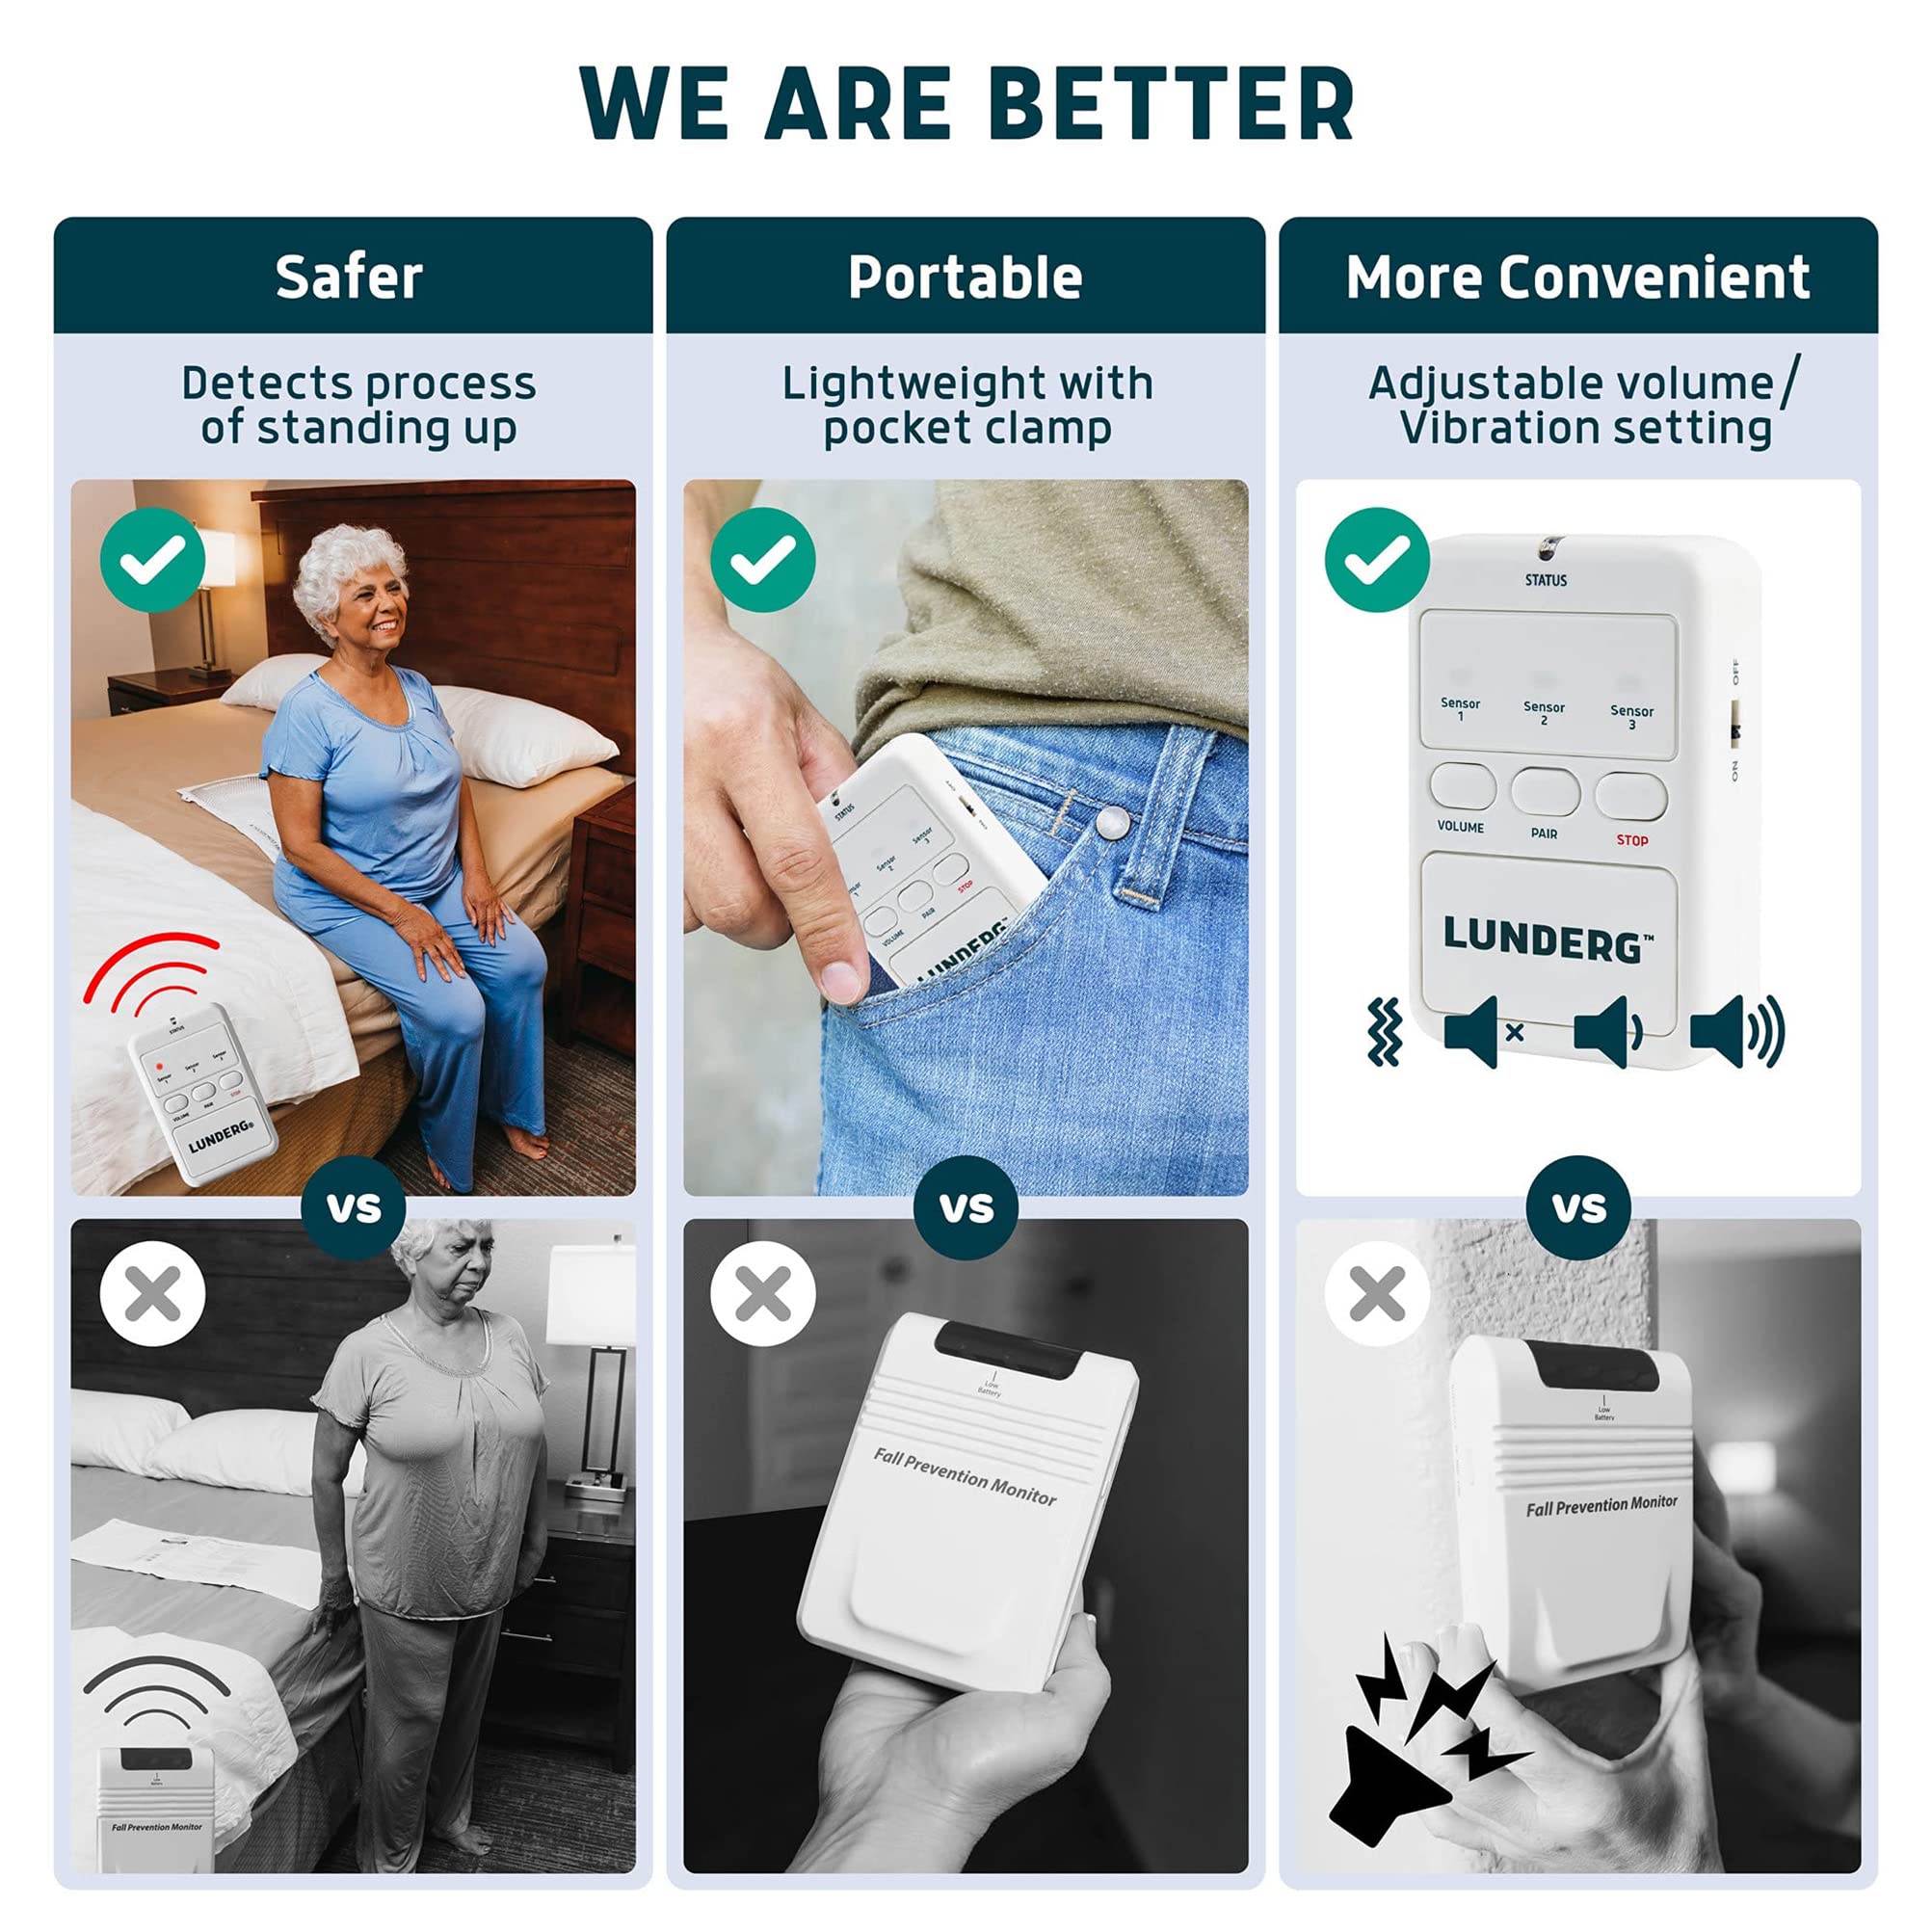 Lunderg Early Alert Bed Alarm System with 3 Wireless Sensor Pads & 1 Pager - Elderly Monitoring Kit with Pre-Alert Smart Technology - Bed Alarms and Fall Prevention for Elderly and Dementia Patients